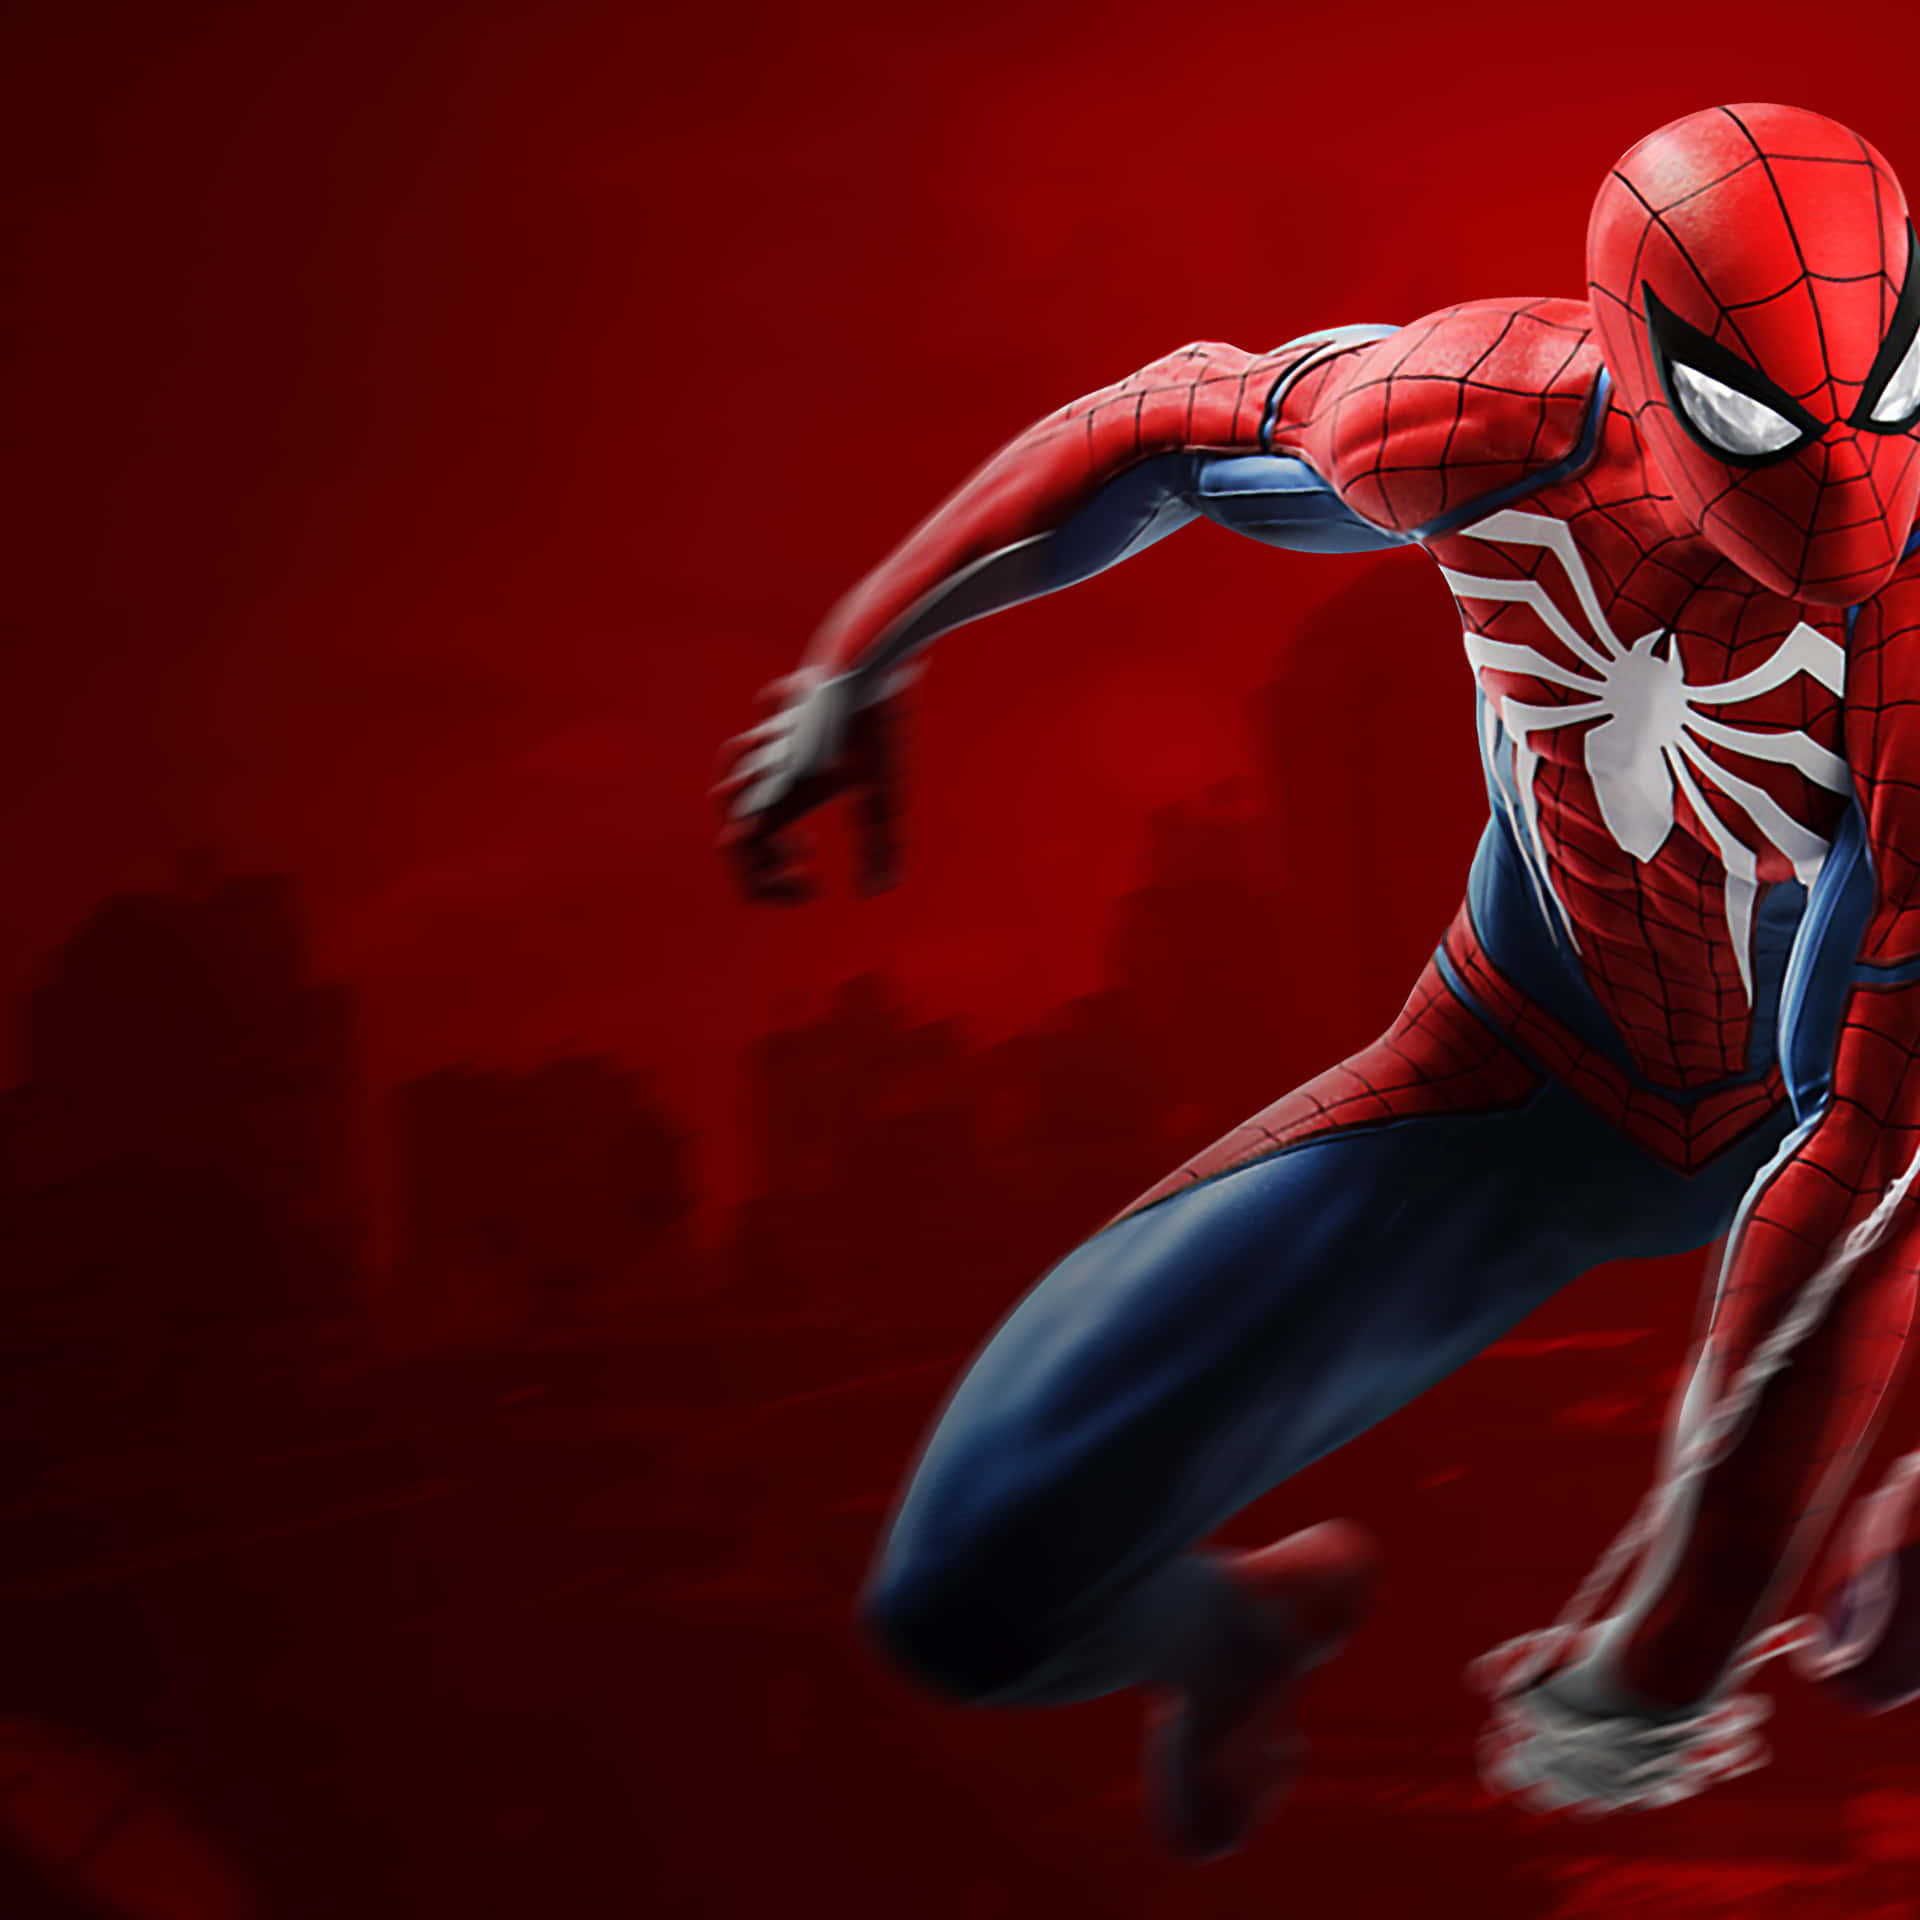 Spider-man Animated Ps4 Profile Picture